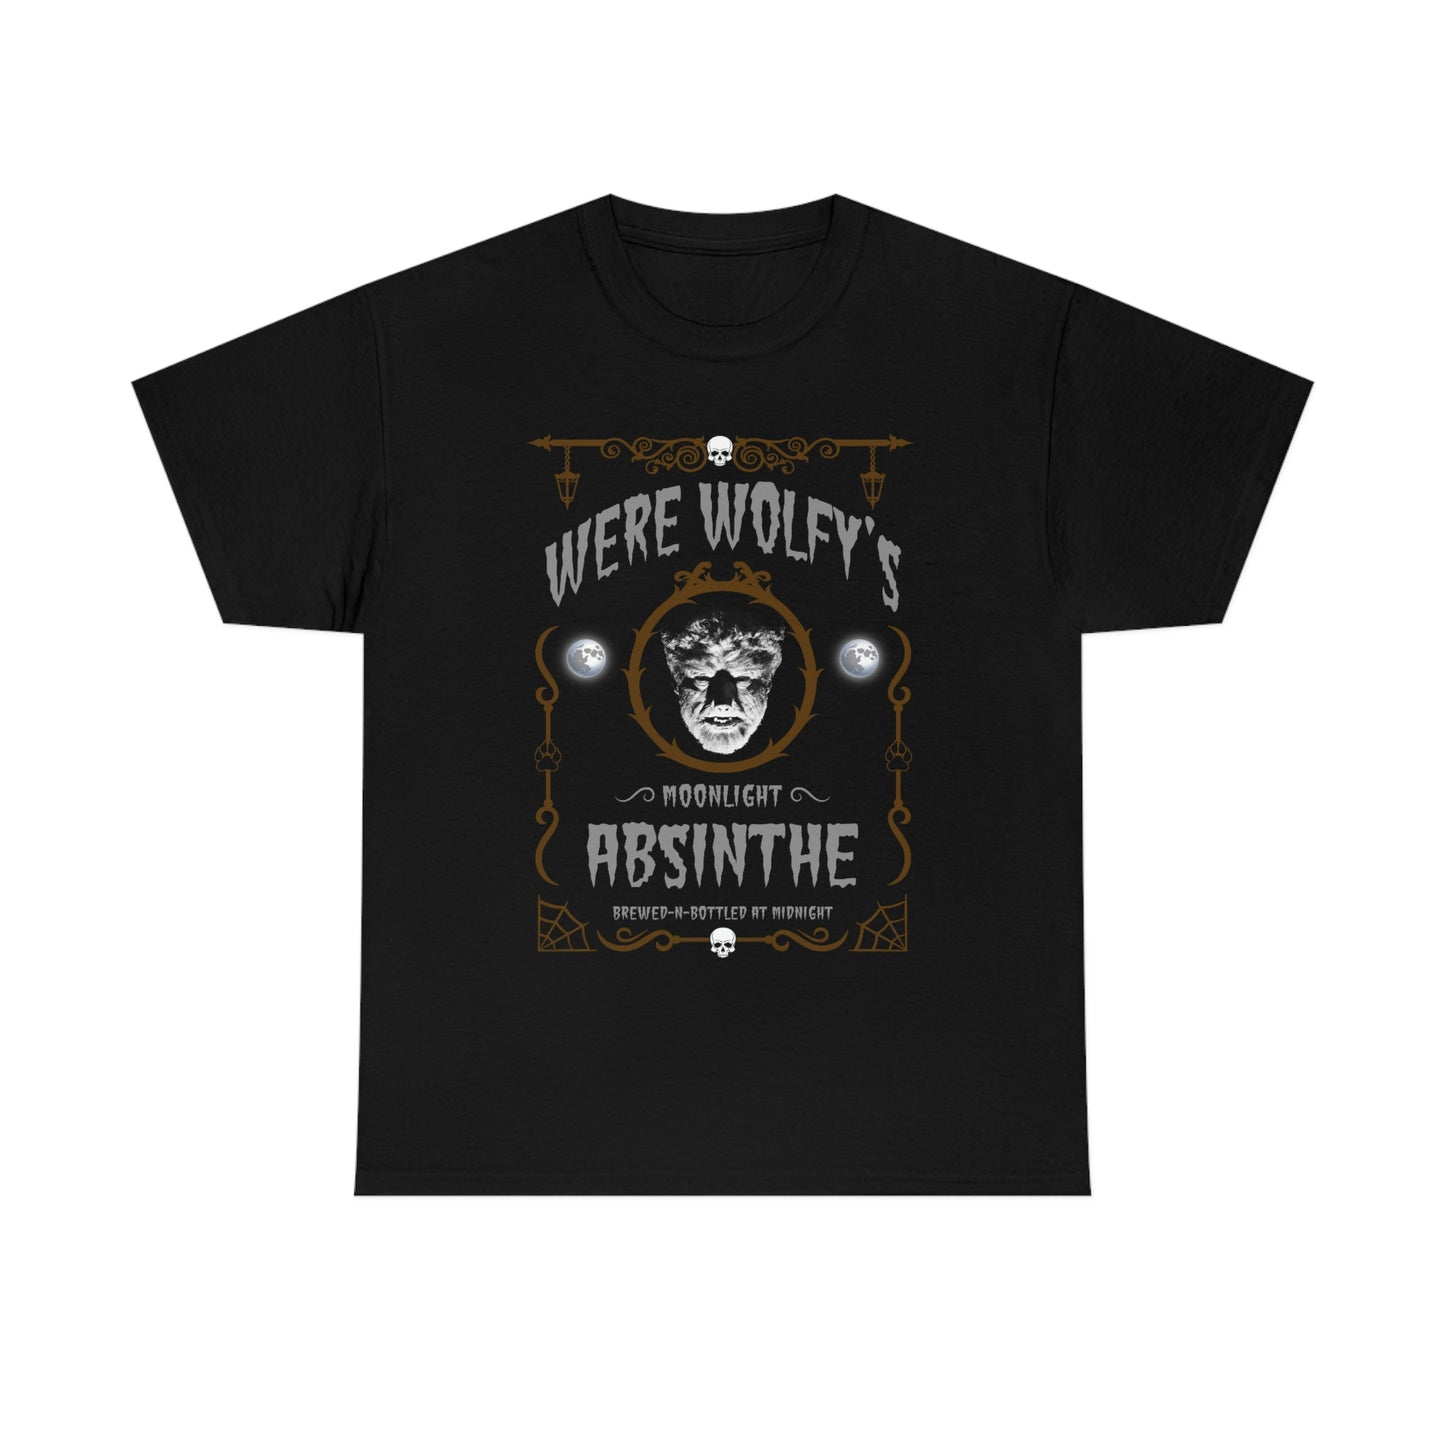 ABSINTHE MONSTERS 10 (WERE WOLFY) Unisex Heavy Cotton Tee